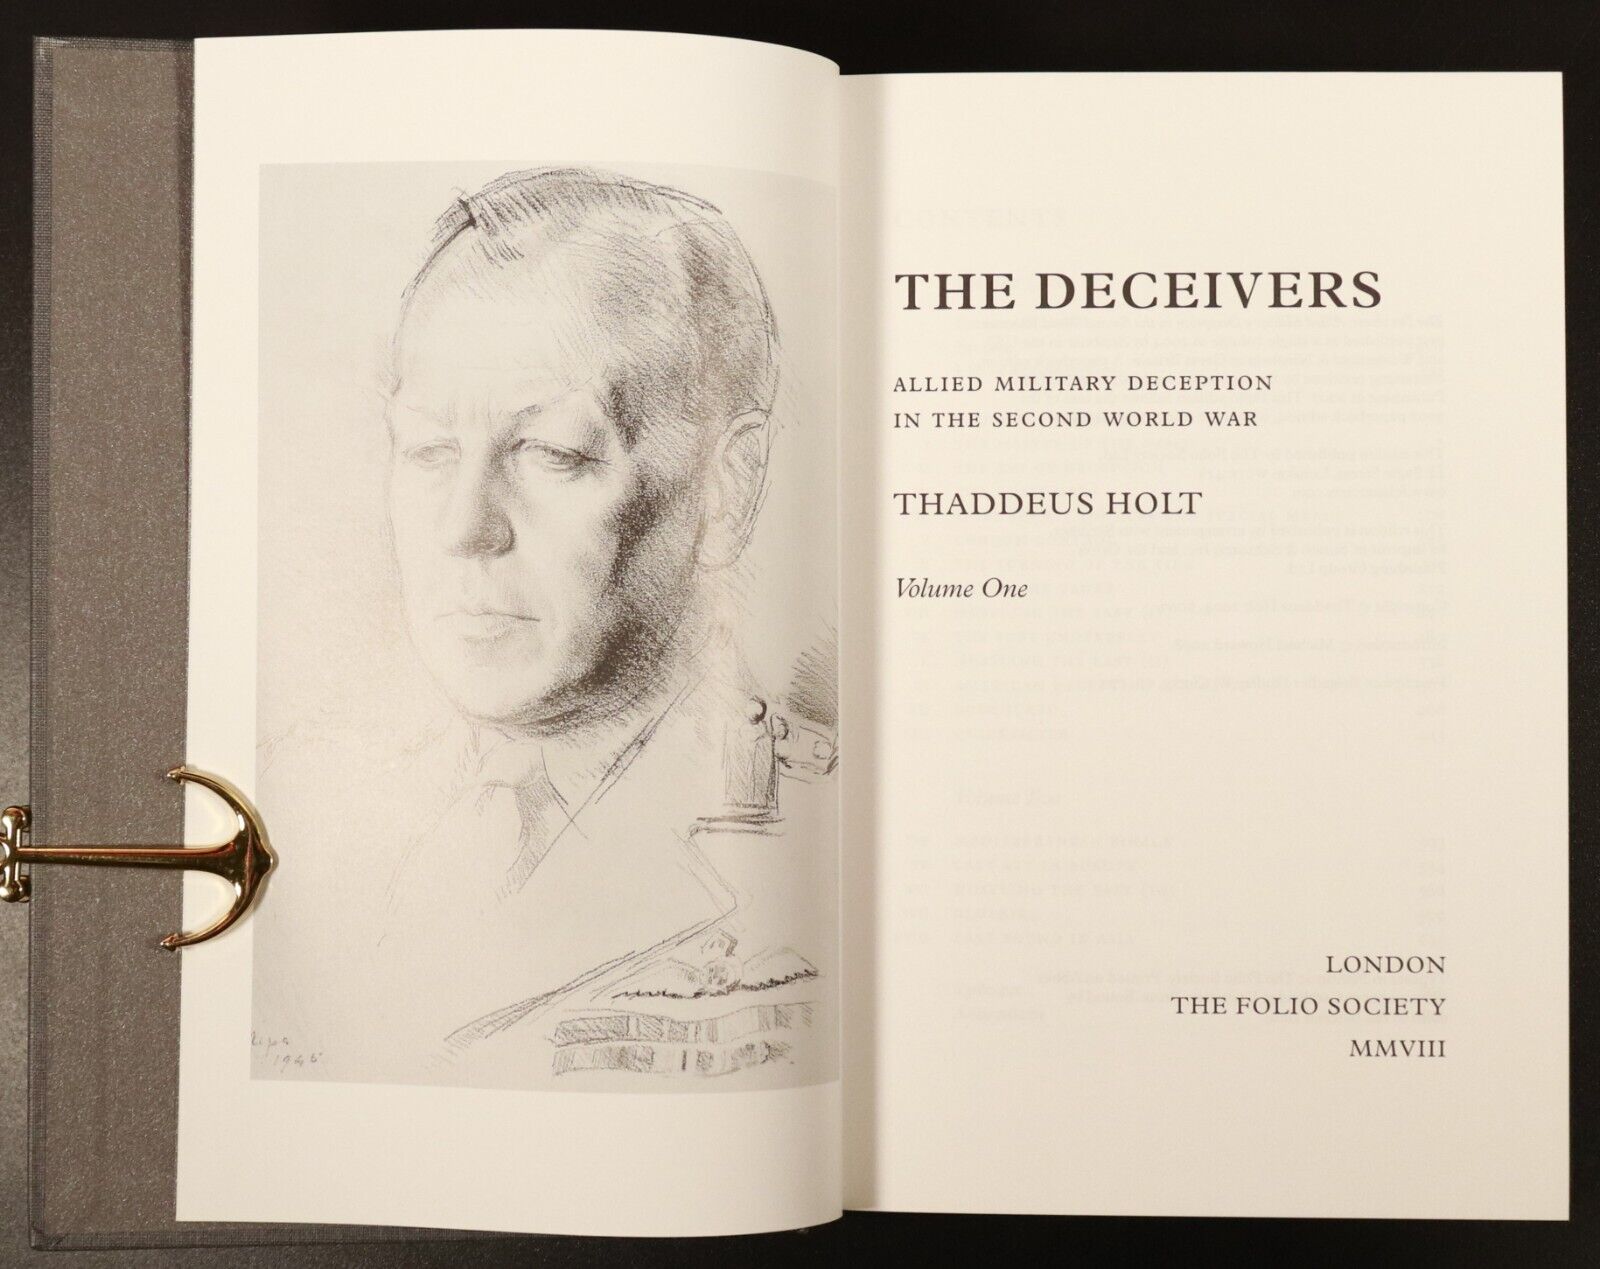 2008 2vol The Deceivers by Thaddeus Holt Folio Society WW2 Military History Book - 0